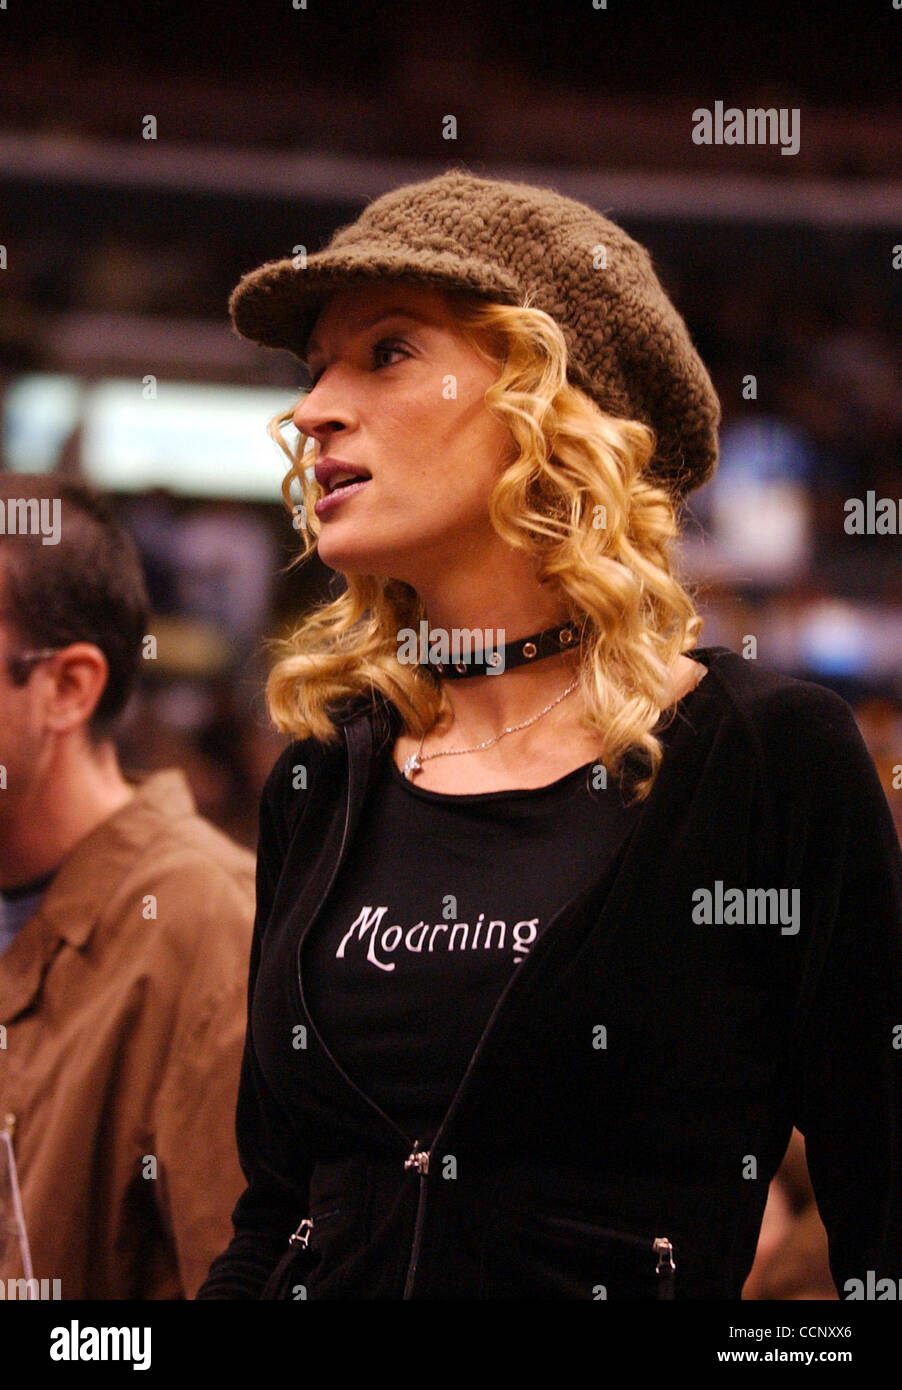 Feb 27, 2004; Los Angeles, CA, USA; Actors John Travolta, UMA THURMAN and musician Steven Tyler of 'Aerosmith' use Staples Center, during a Los Angeles Lakers game against the Sacramento Kings, as their stage while filming the sequel to 'Get Shortie' called 'Be Cool.' This is the first time John and Stock Photo